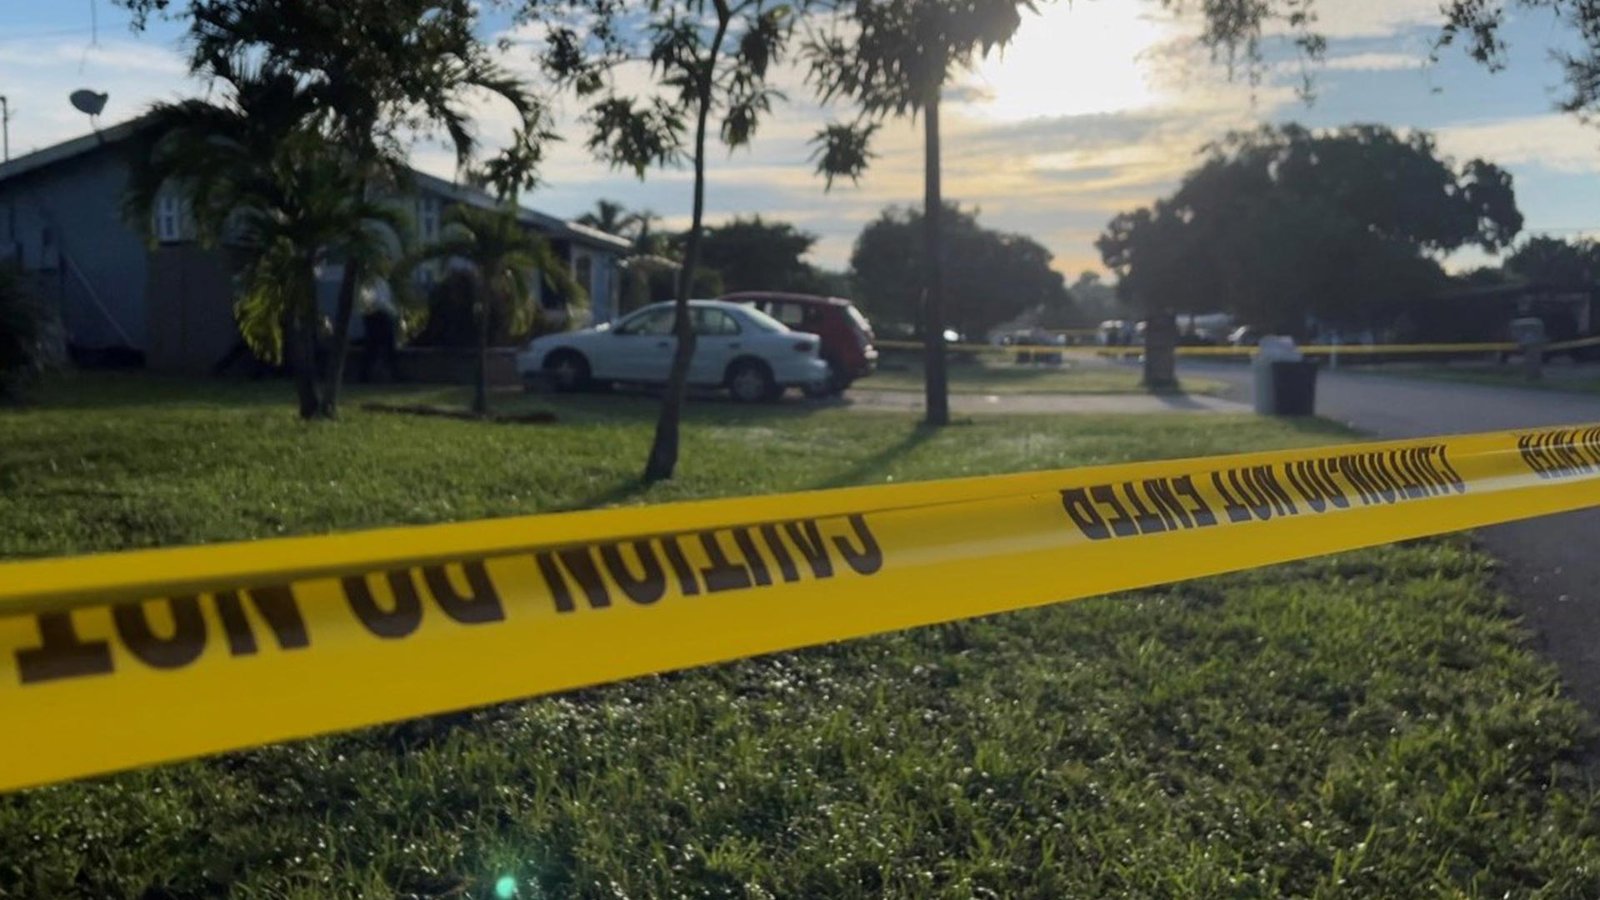 One person dead after shooting in Fort Myers neighborhood